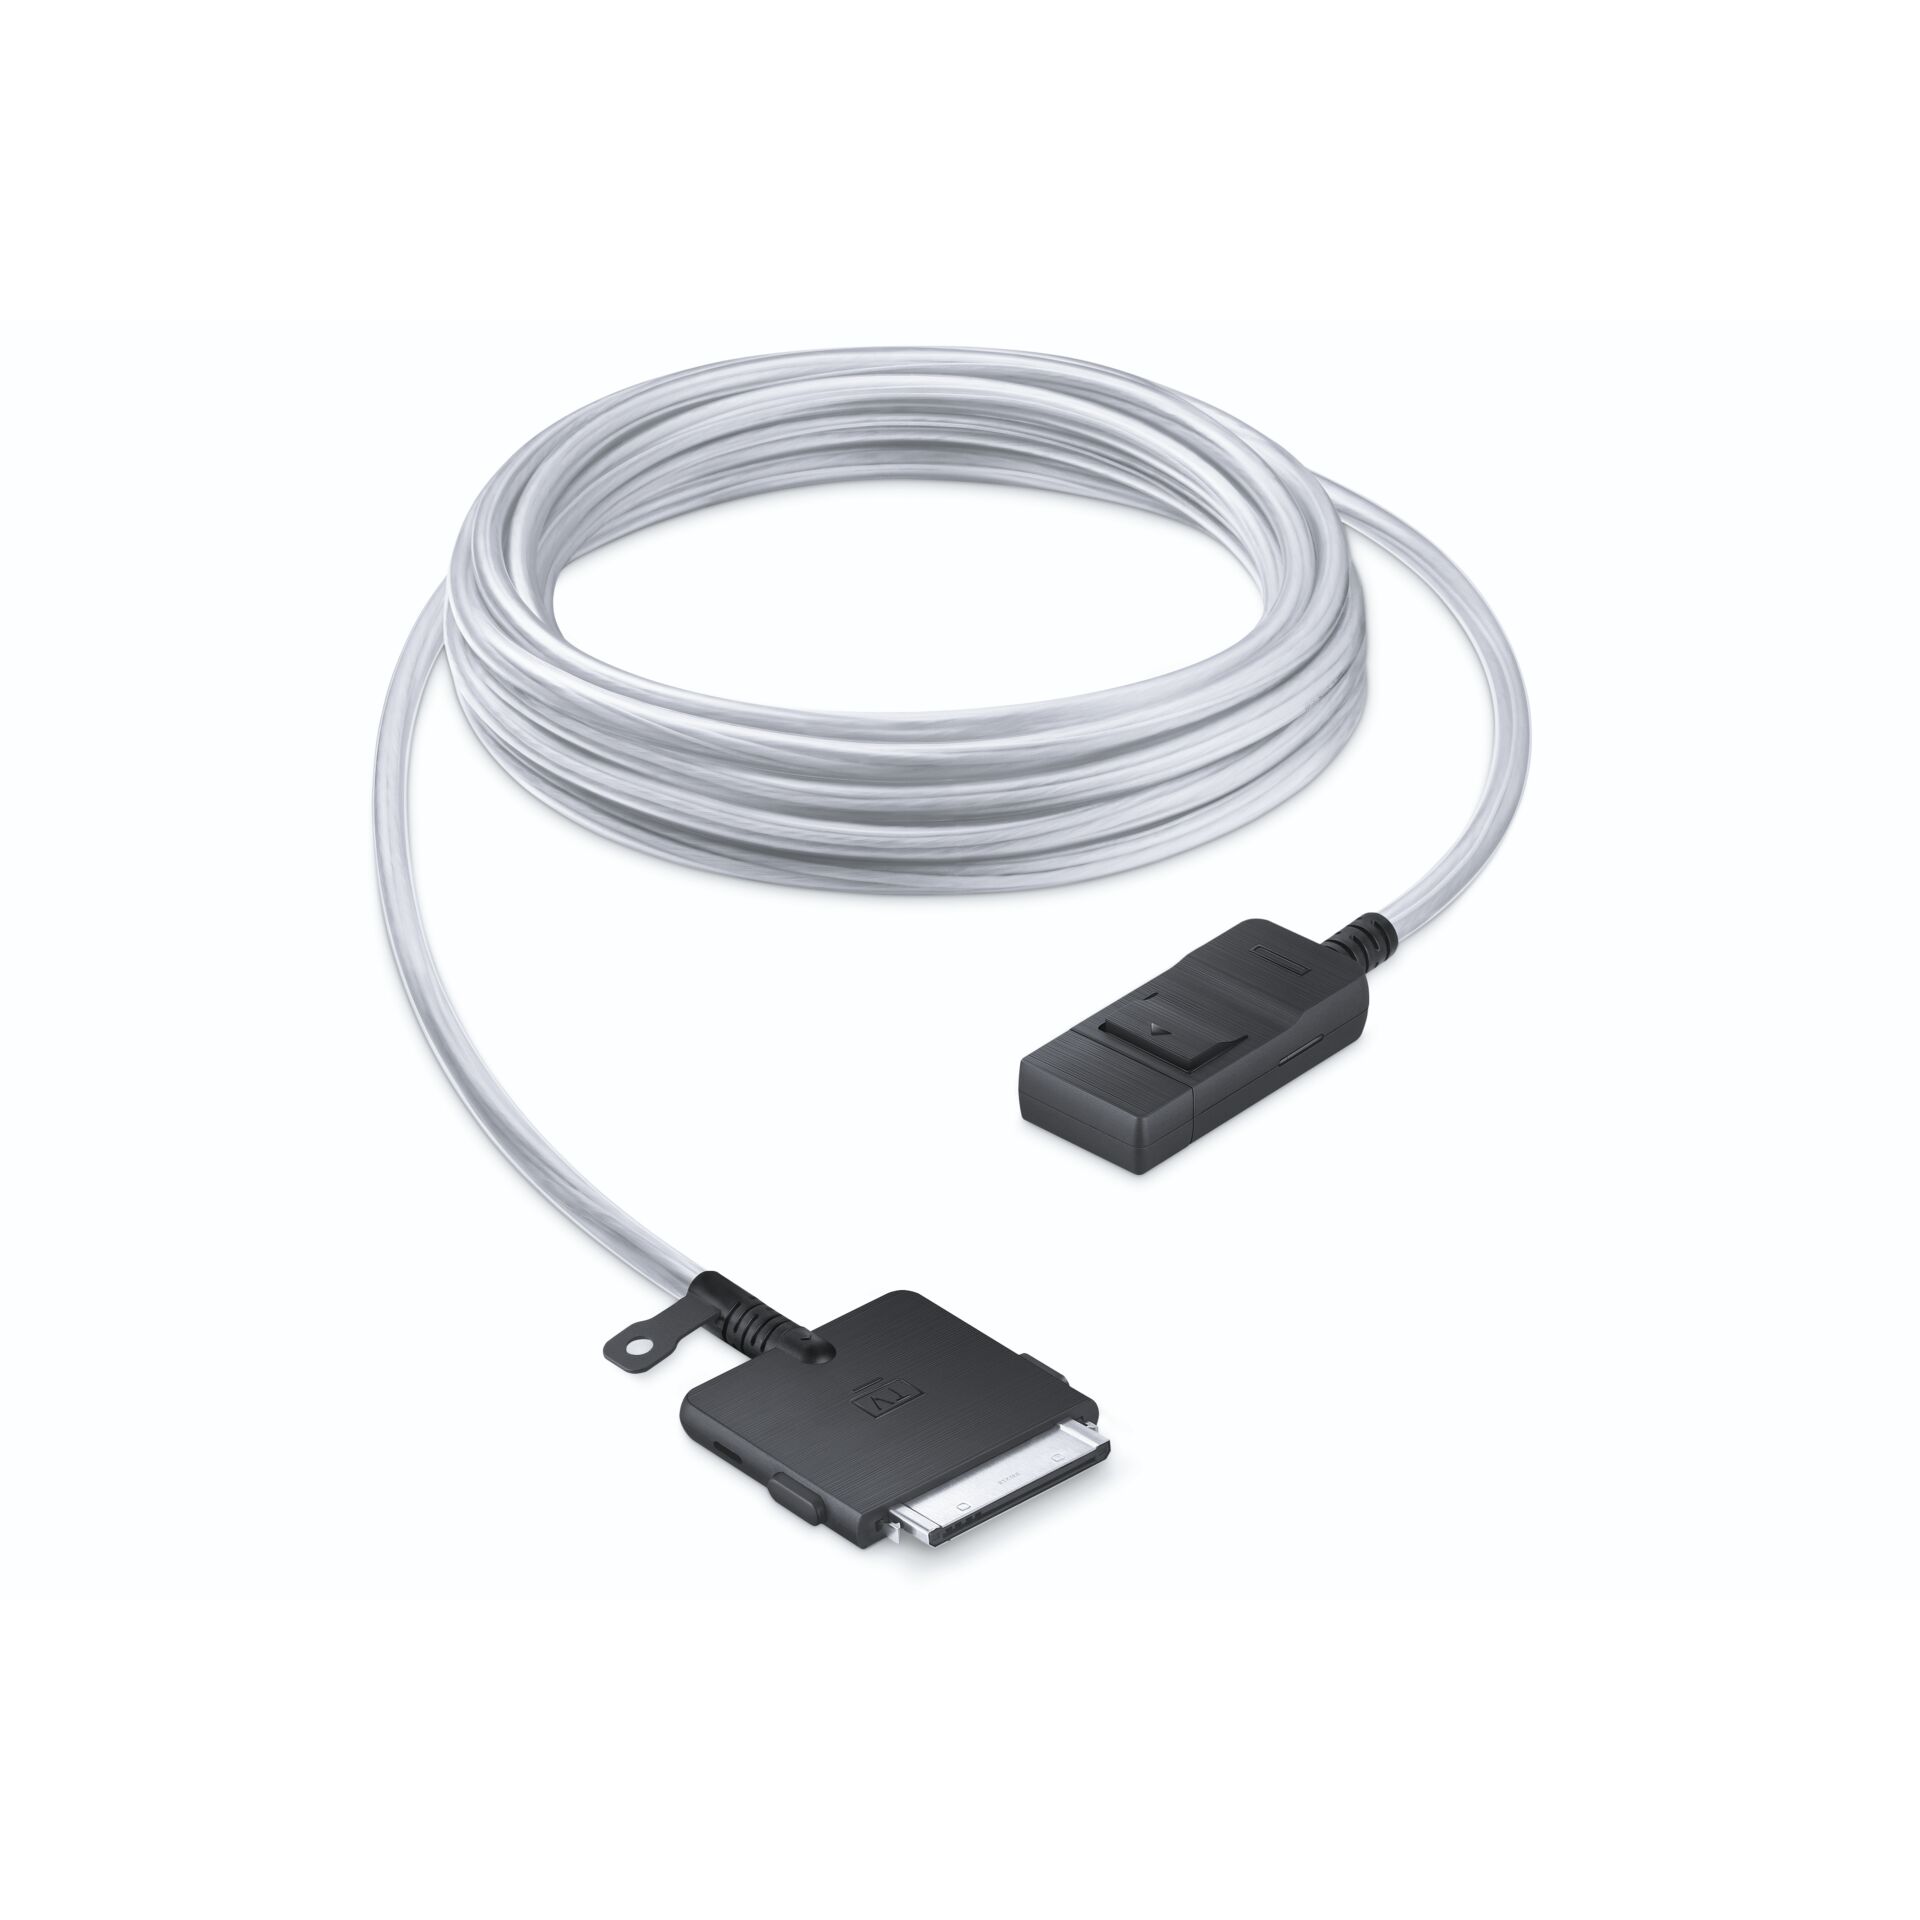 Samsung VG-SOCA05/XC One Cable Solution 5m